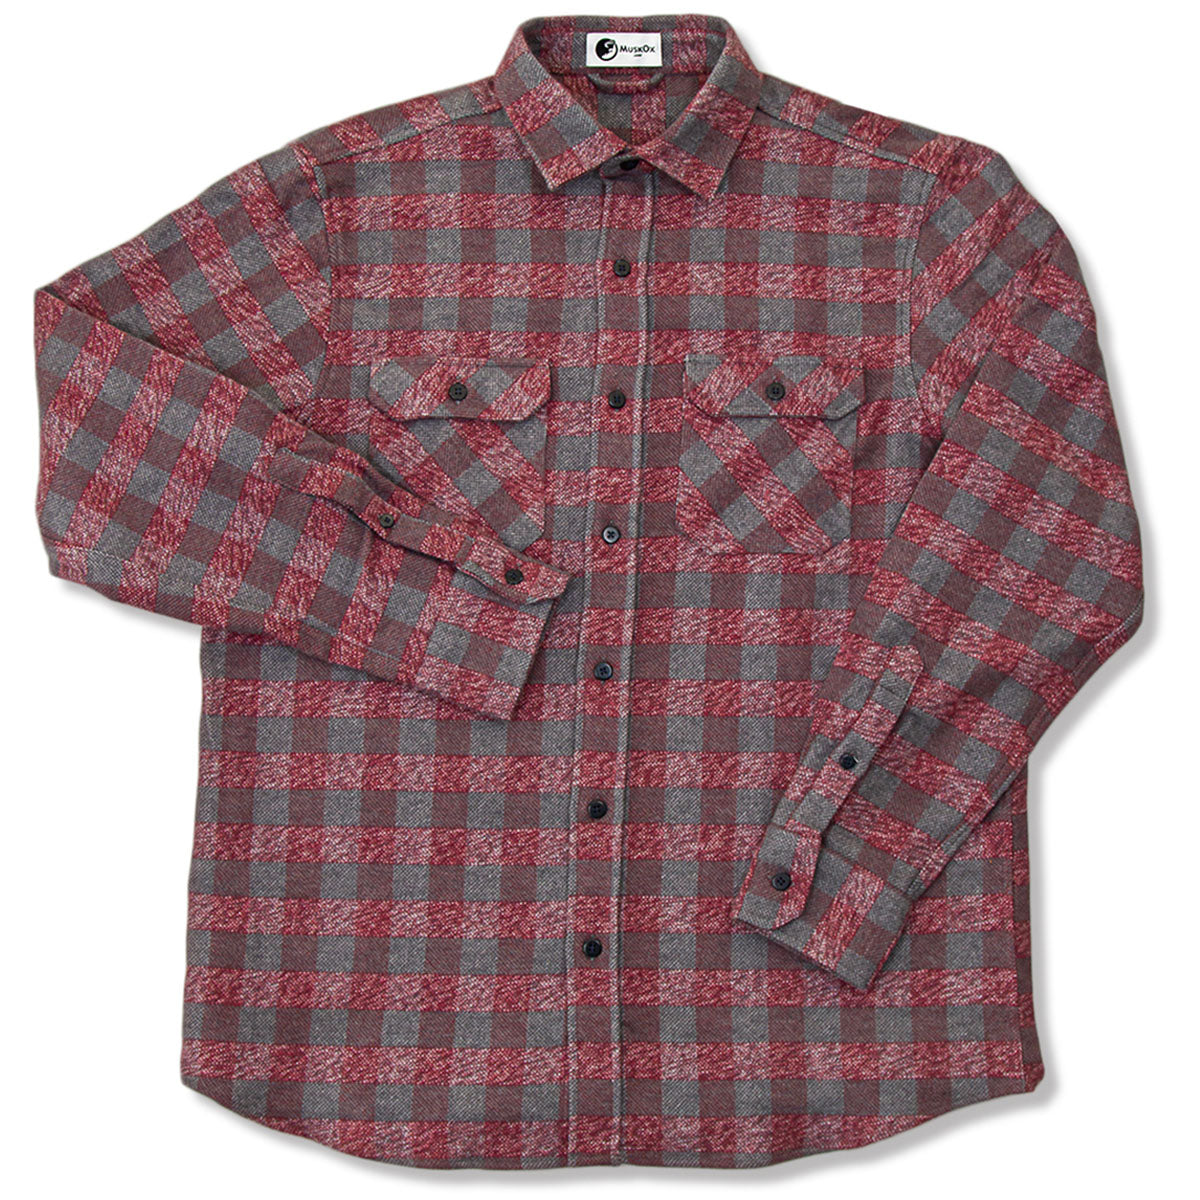 The Grand Flannel, Heavyweight Cotton Flannel Shirt for Men by